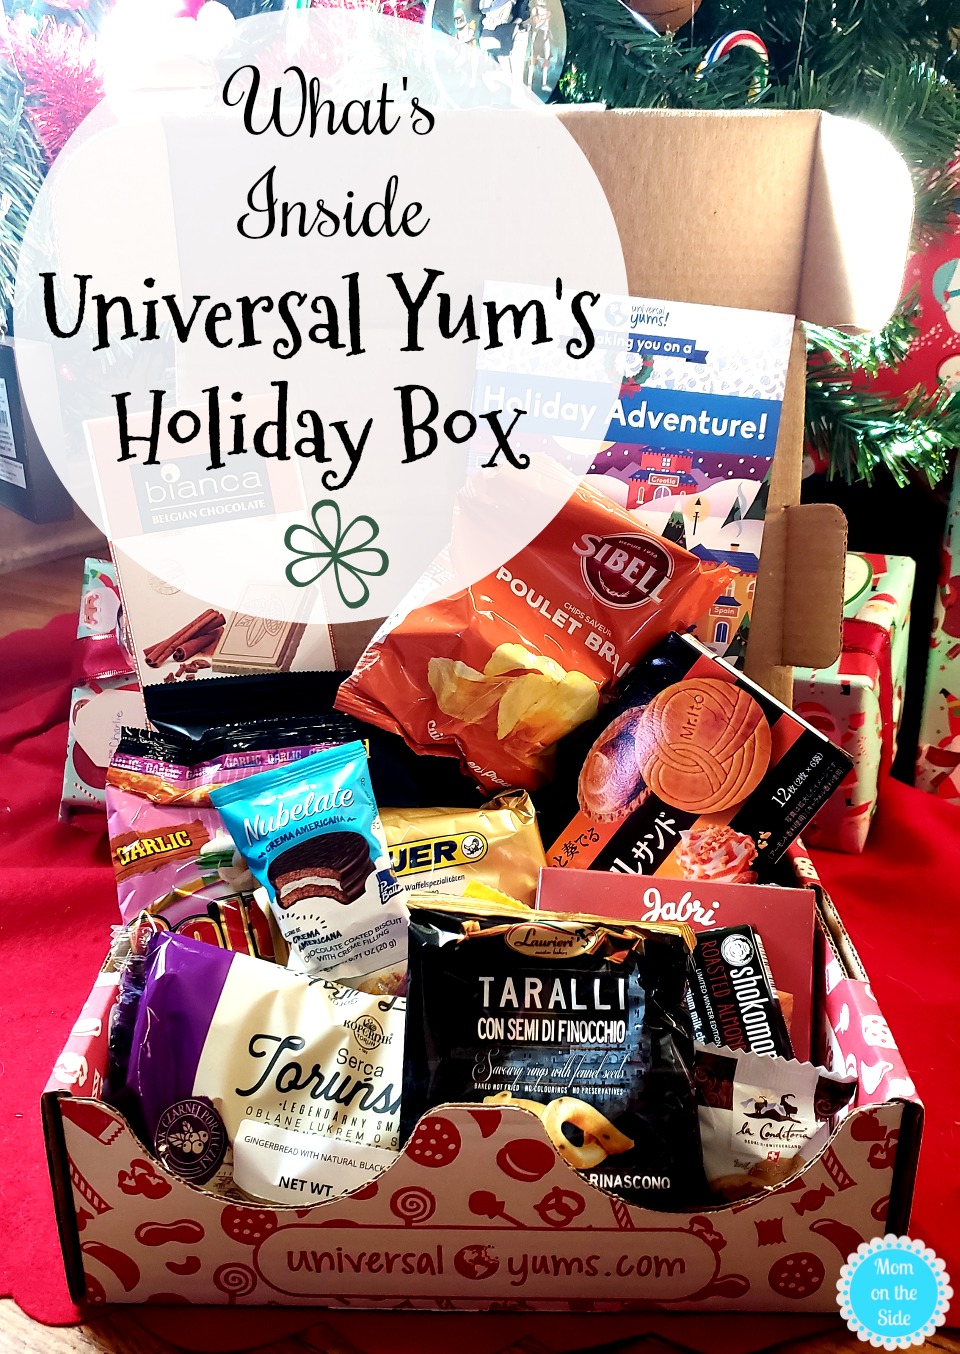 What's Inside Universal Yum's Holiday Box for 2019